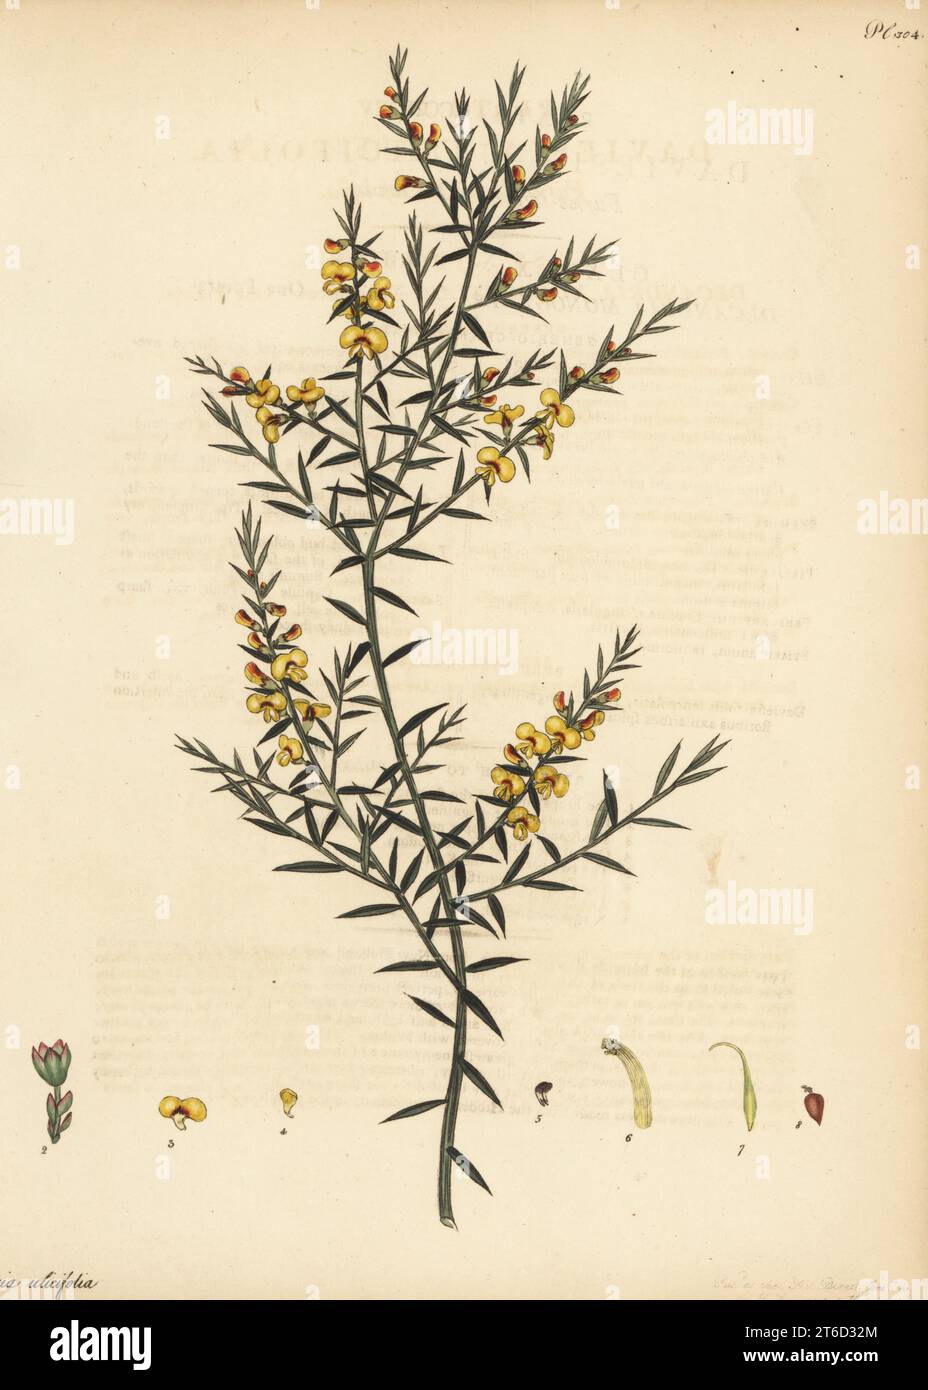 Gorse bitter pea or furze-leaved daviesia, Daviesia ulicifolia. From New Holland, Australia, in the George Hibbert collection. Copperplate engraving drawn, engraved and hand-coloured by Henry Andrews from his Botanical Register, Volume 5, self-published in Knightsbridge, London, 1803. Stock Photo